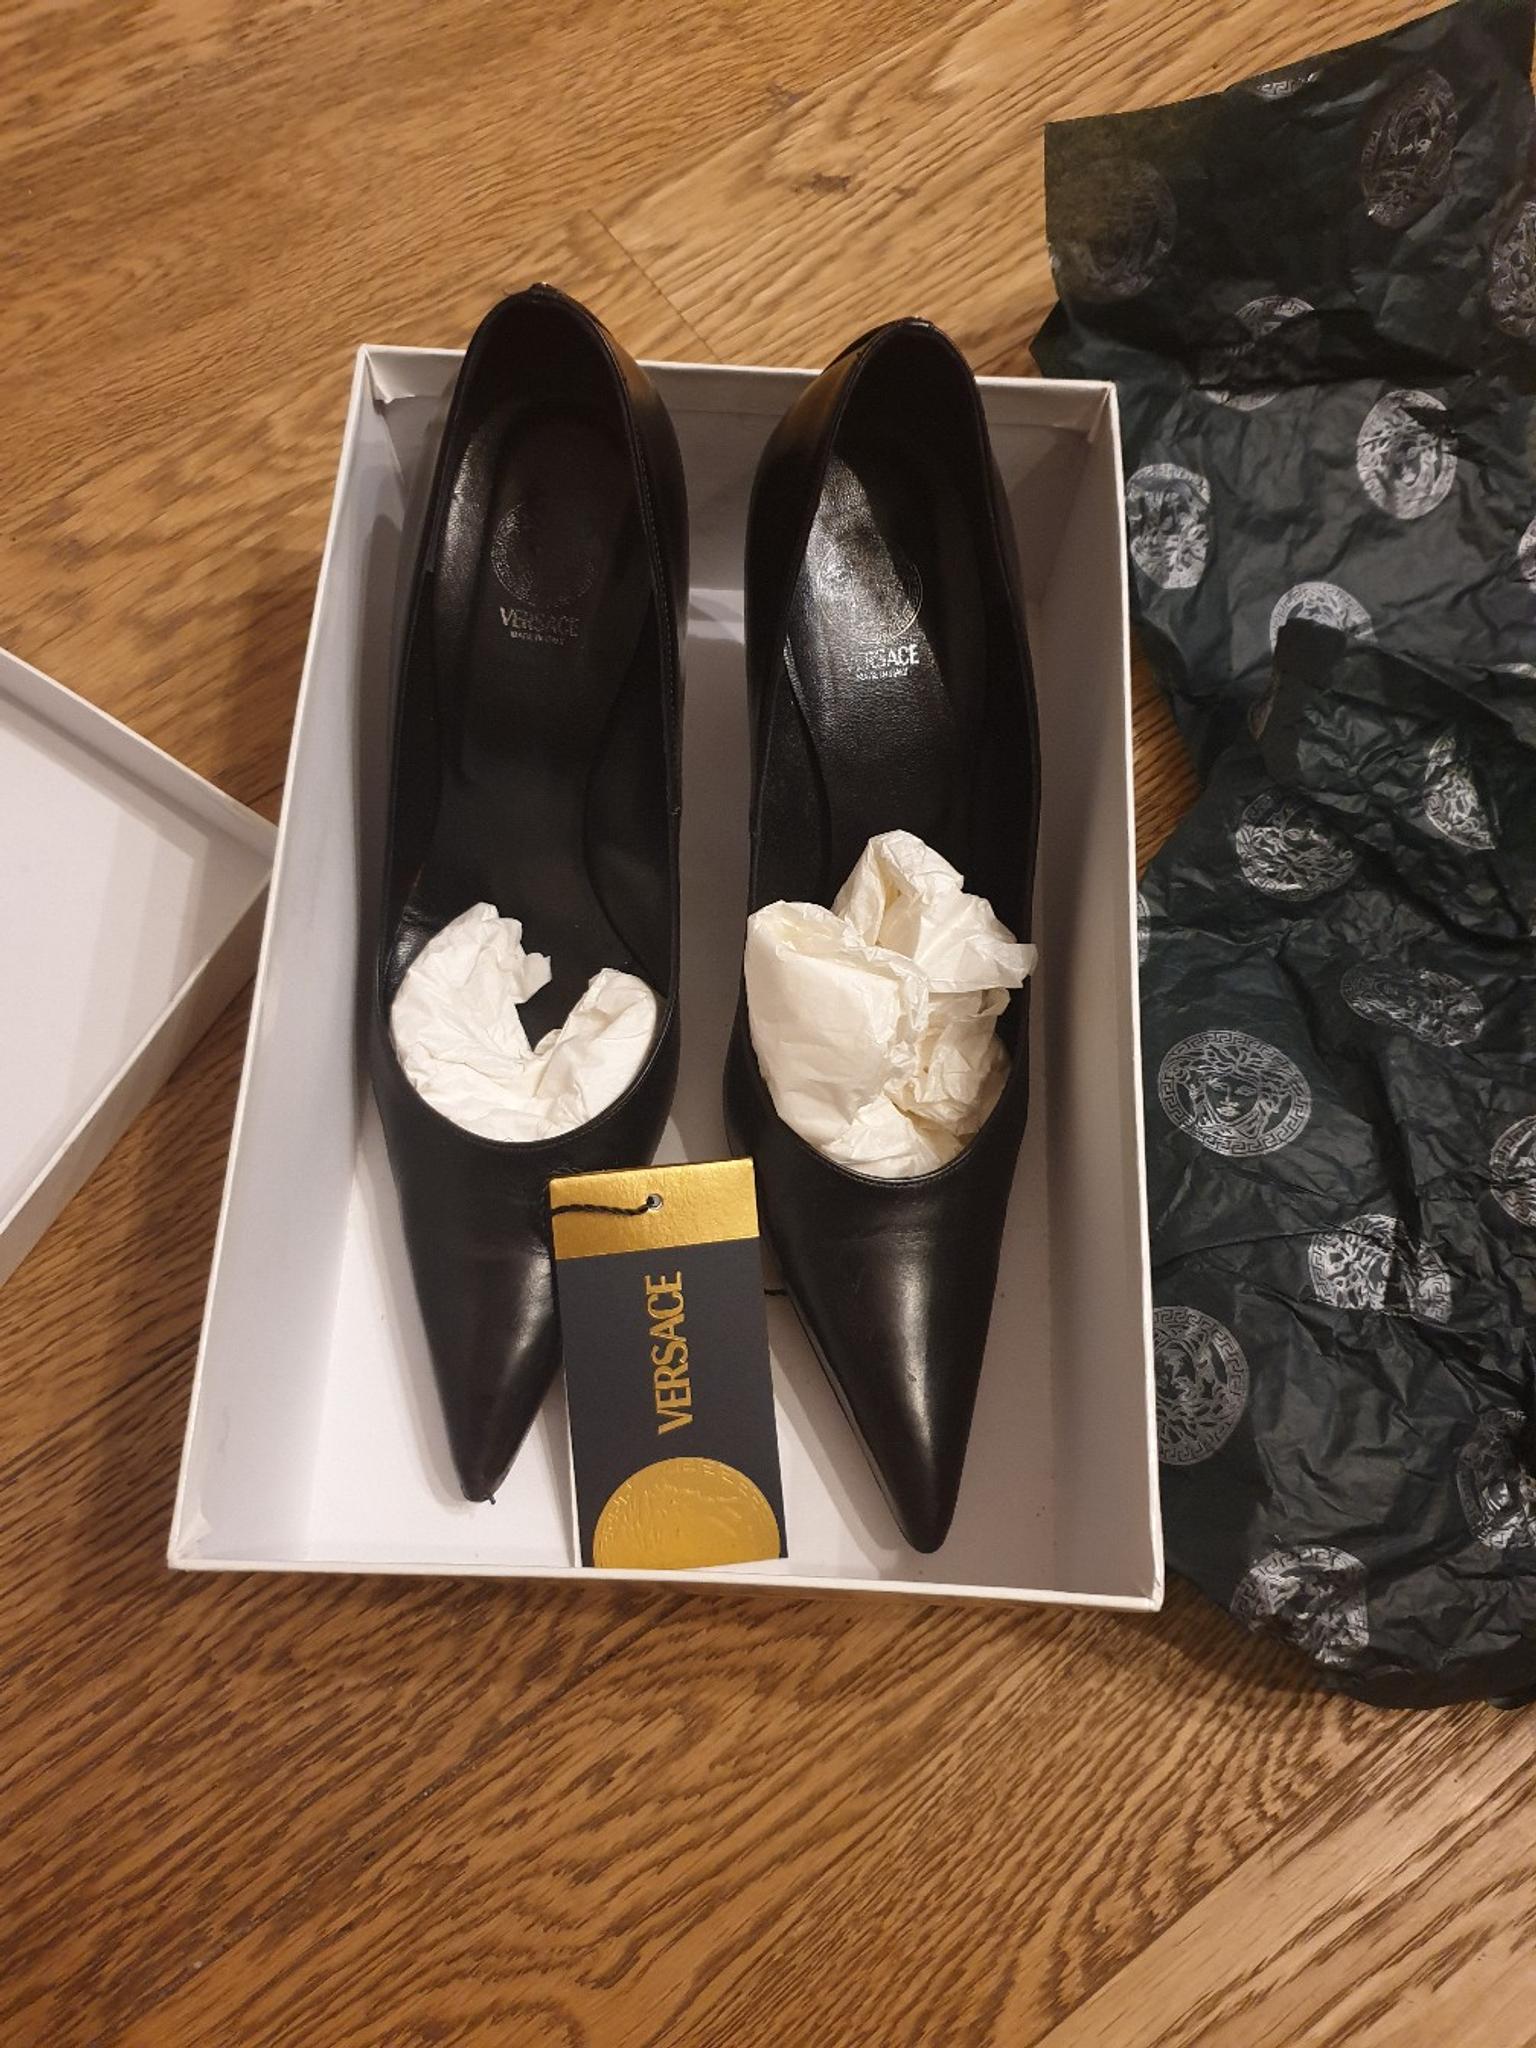 Gianni Versace scarpe tacco in 20133 Milano for €110.00 for sale | Shpock